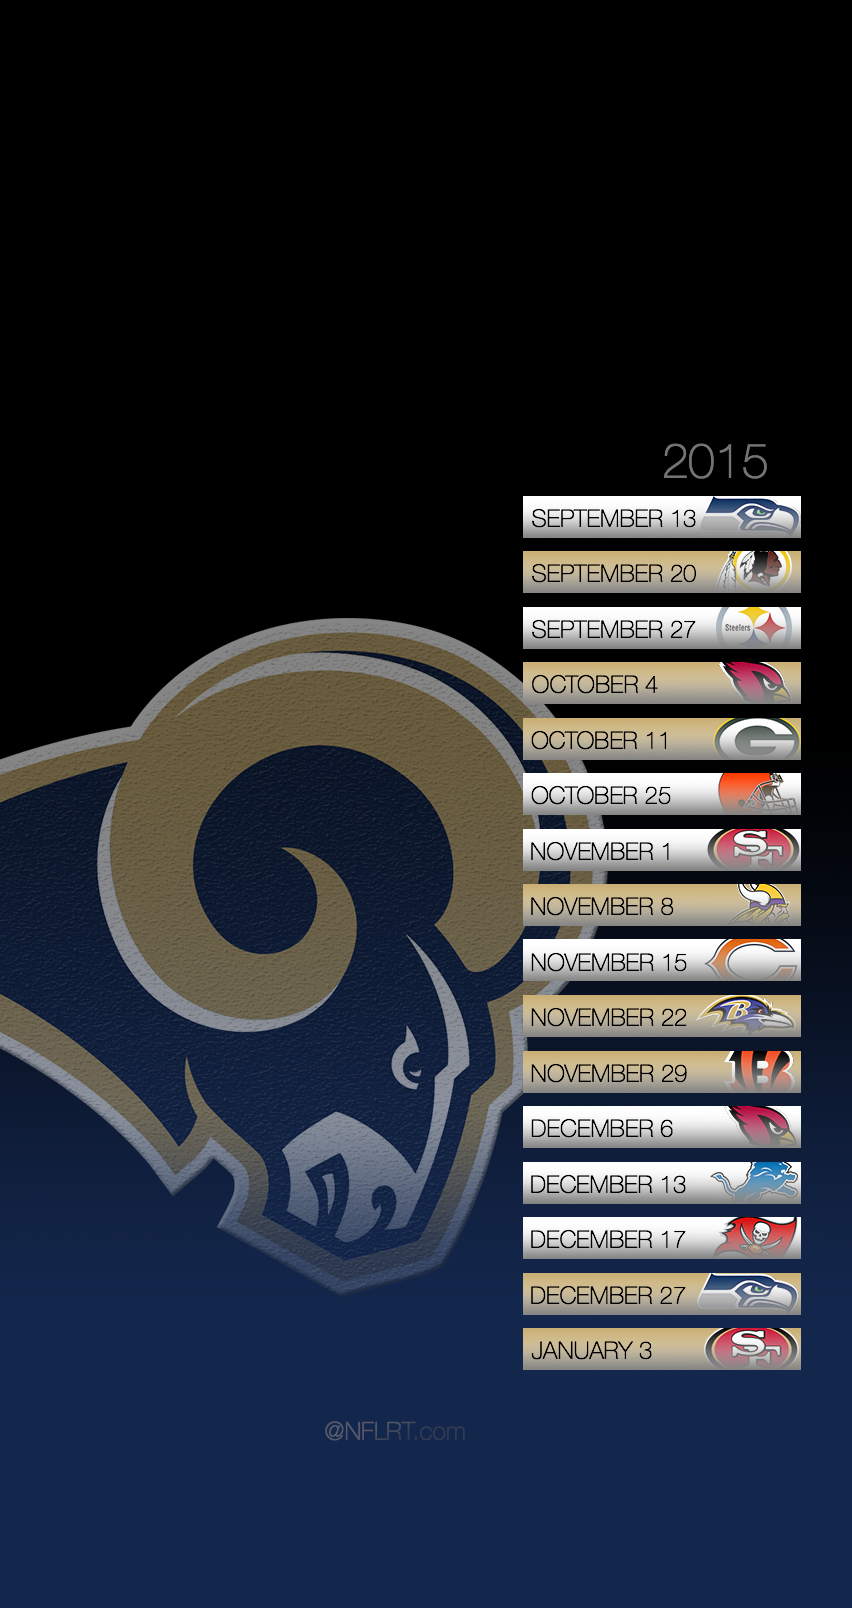 Free download 2015 NFL Schedule Wallpapers Page 8 of 8 NFLRT [852x1608